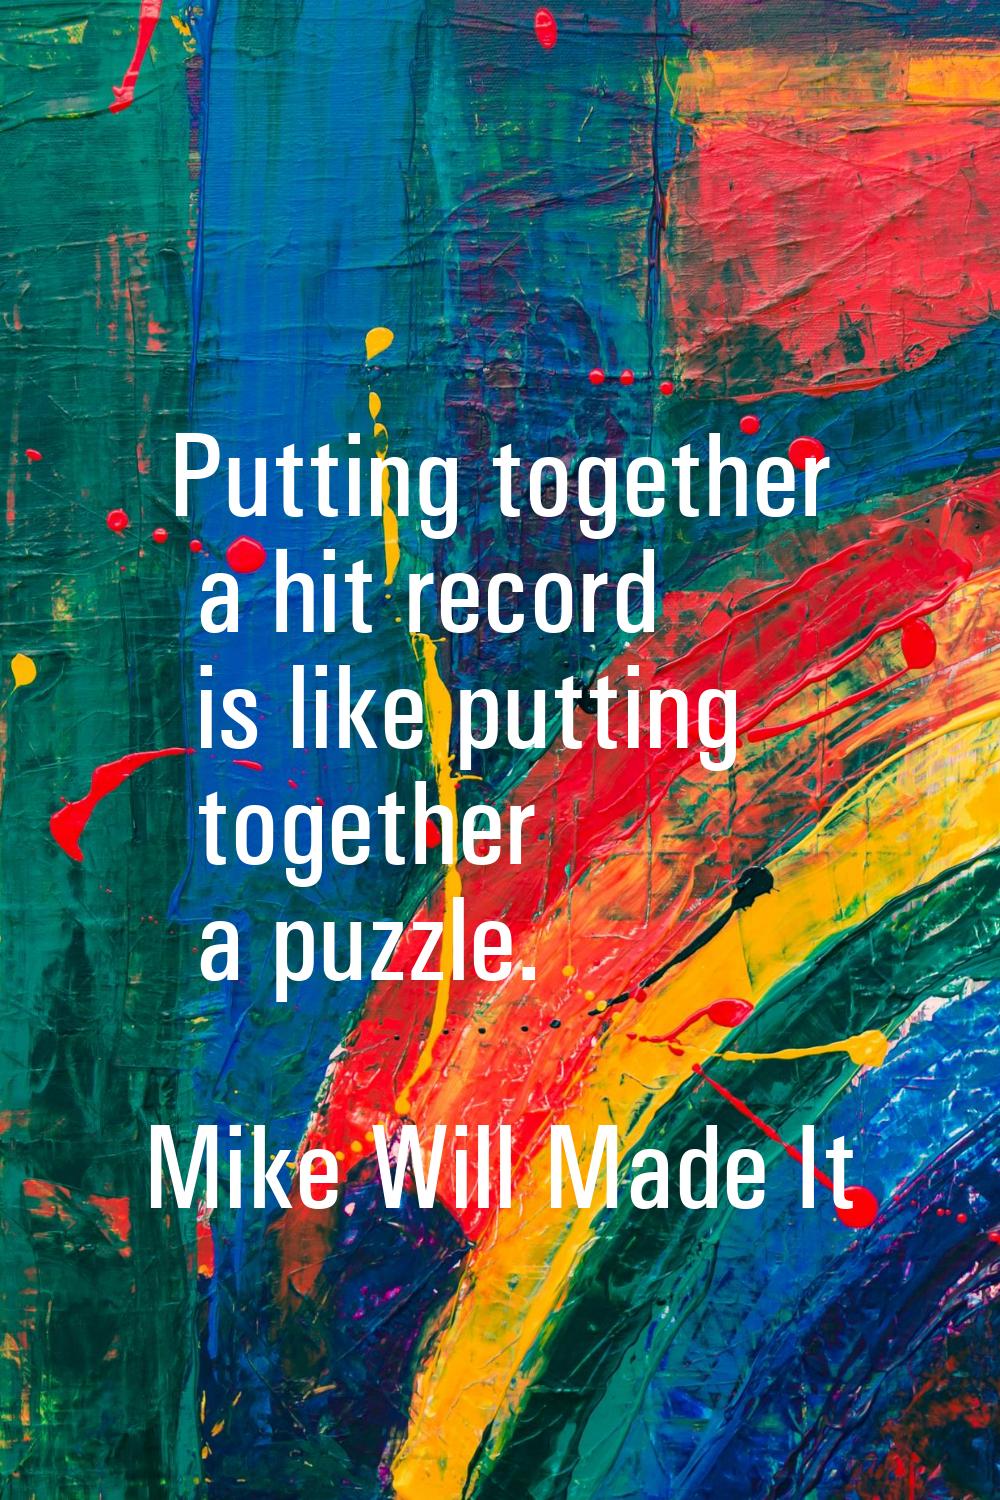 Putting together a hit record is like putting together a puzzle.